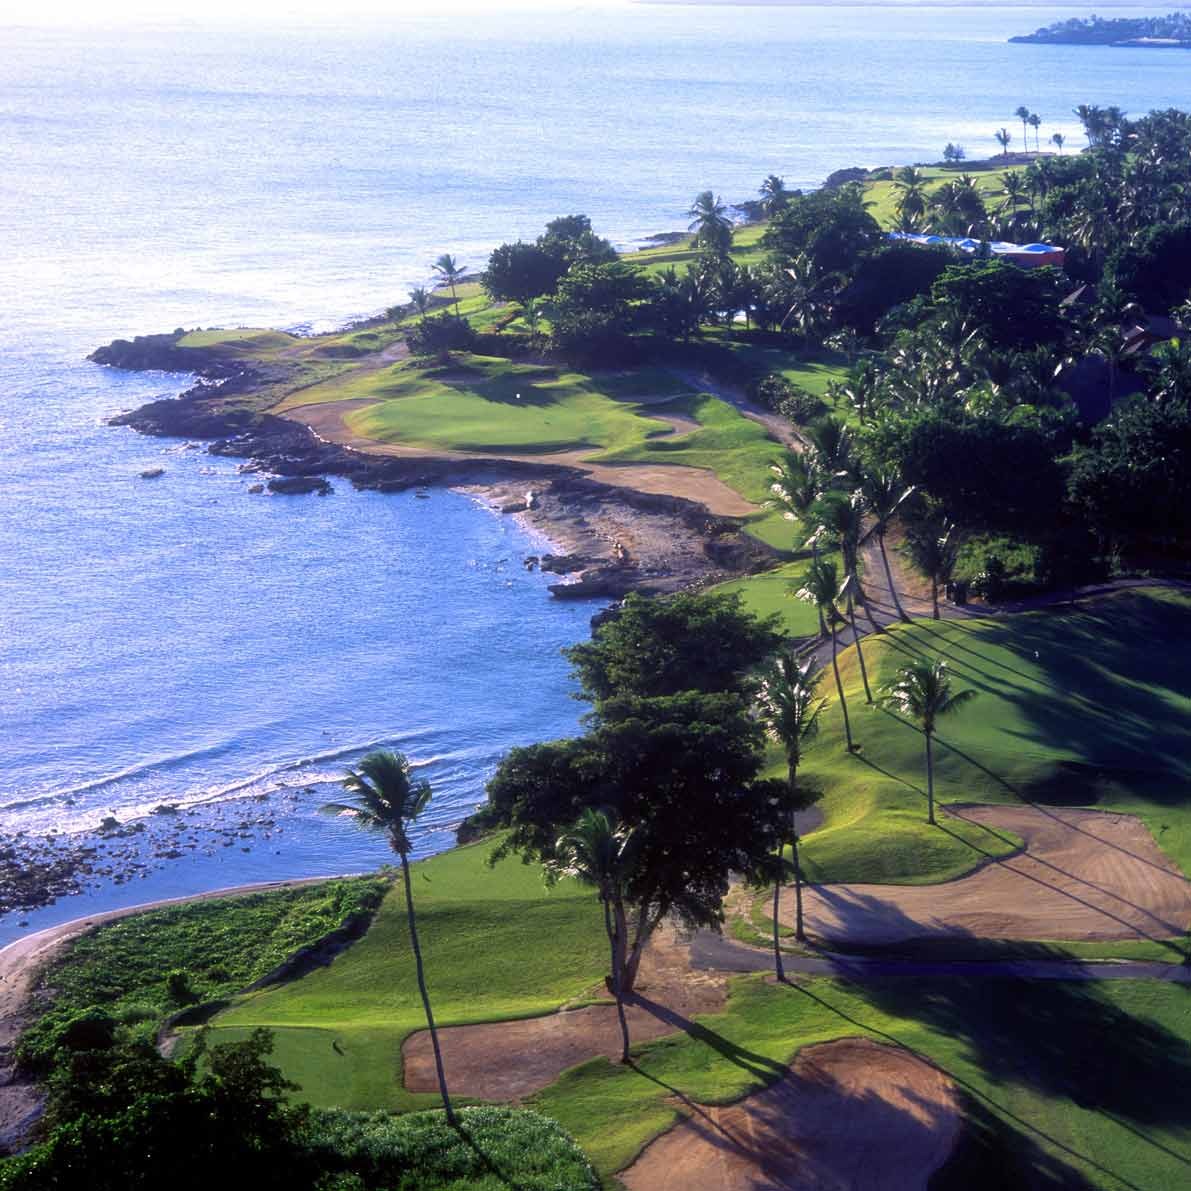 Golf Vacation Package - Time for your Group Getaway? Casa de Campo Villa & Teeth Of The Dog from $397 per day!